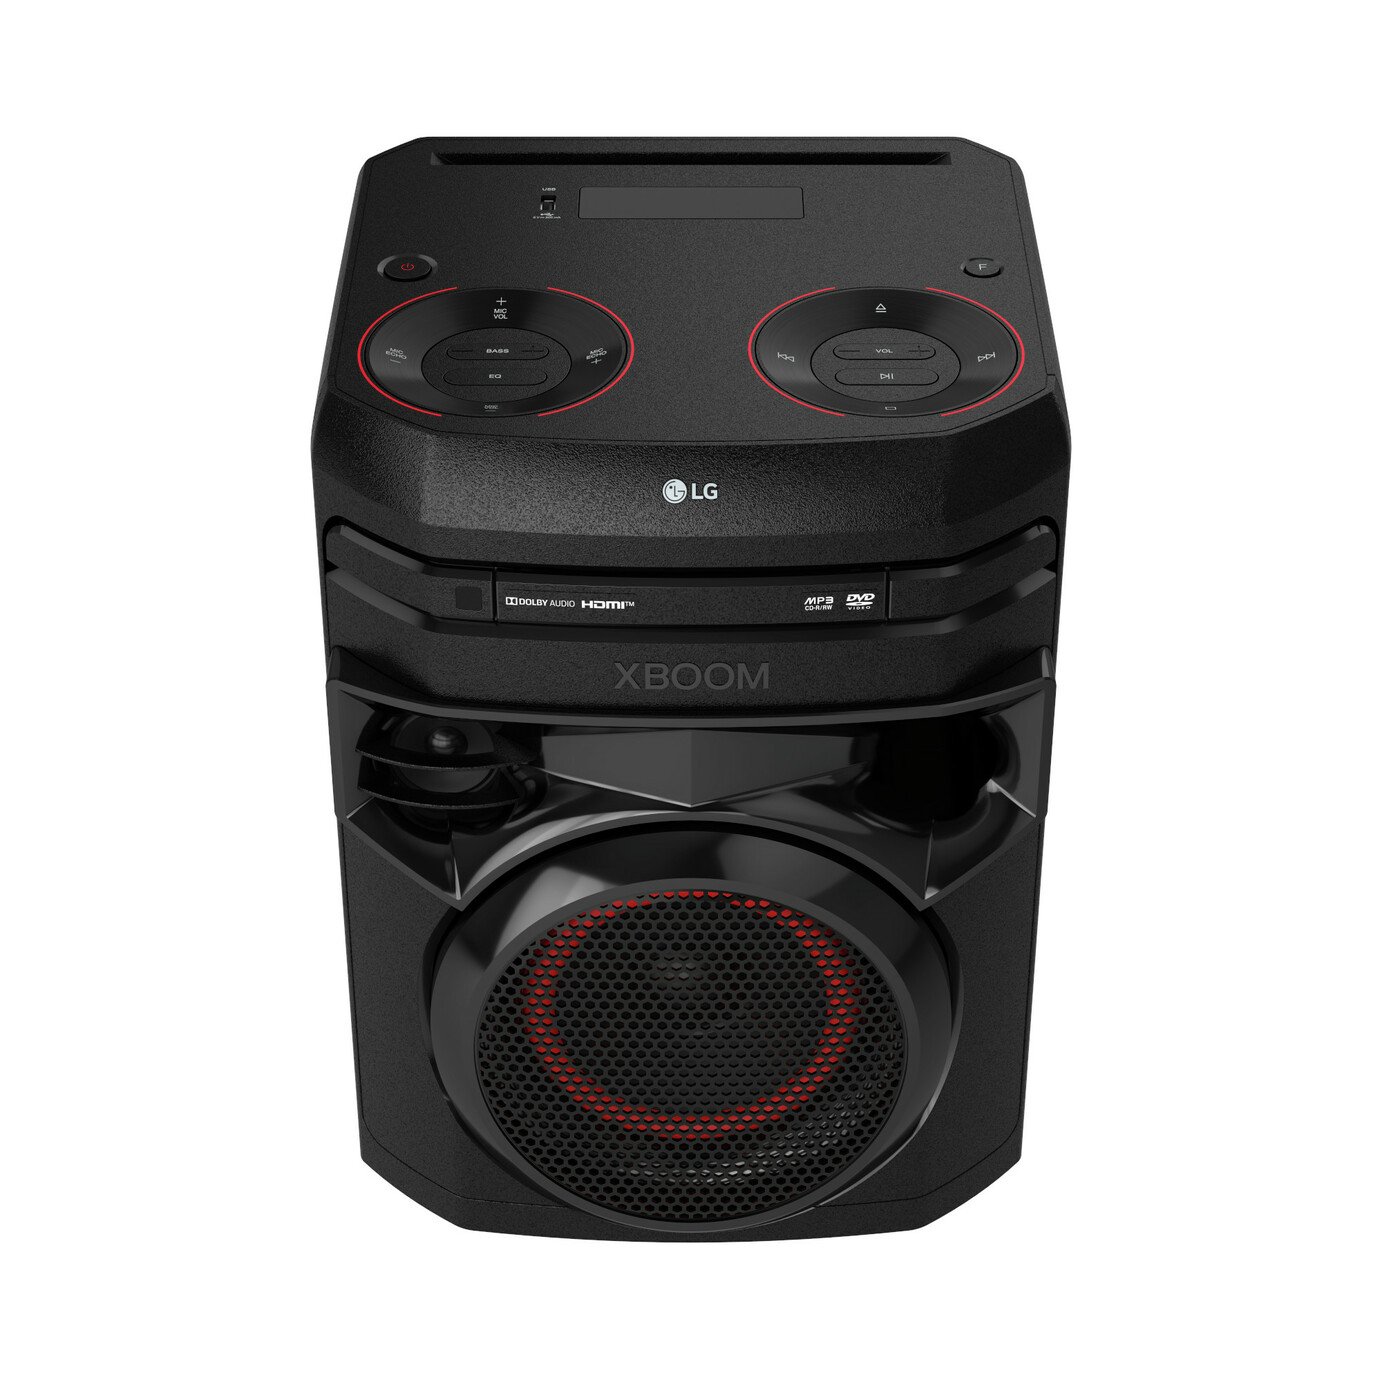 LG XBOOM ON2D Bluetooth Megasound Party Speaker Review